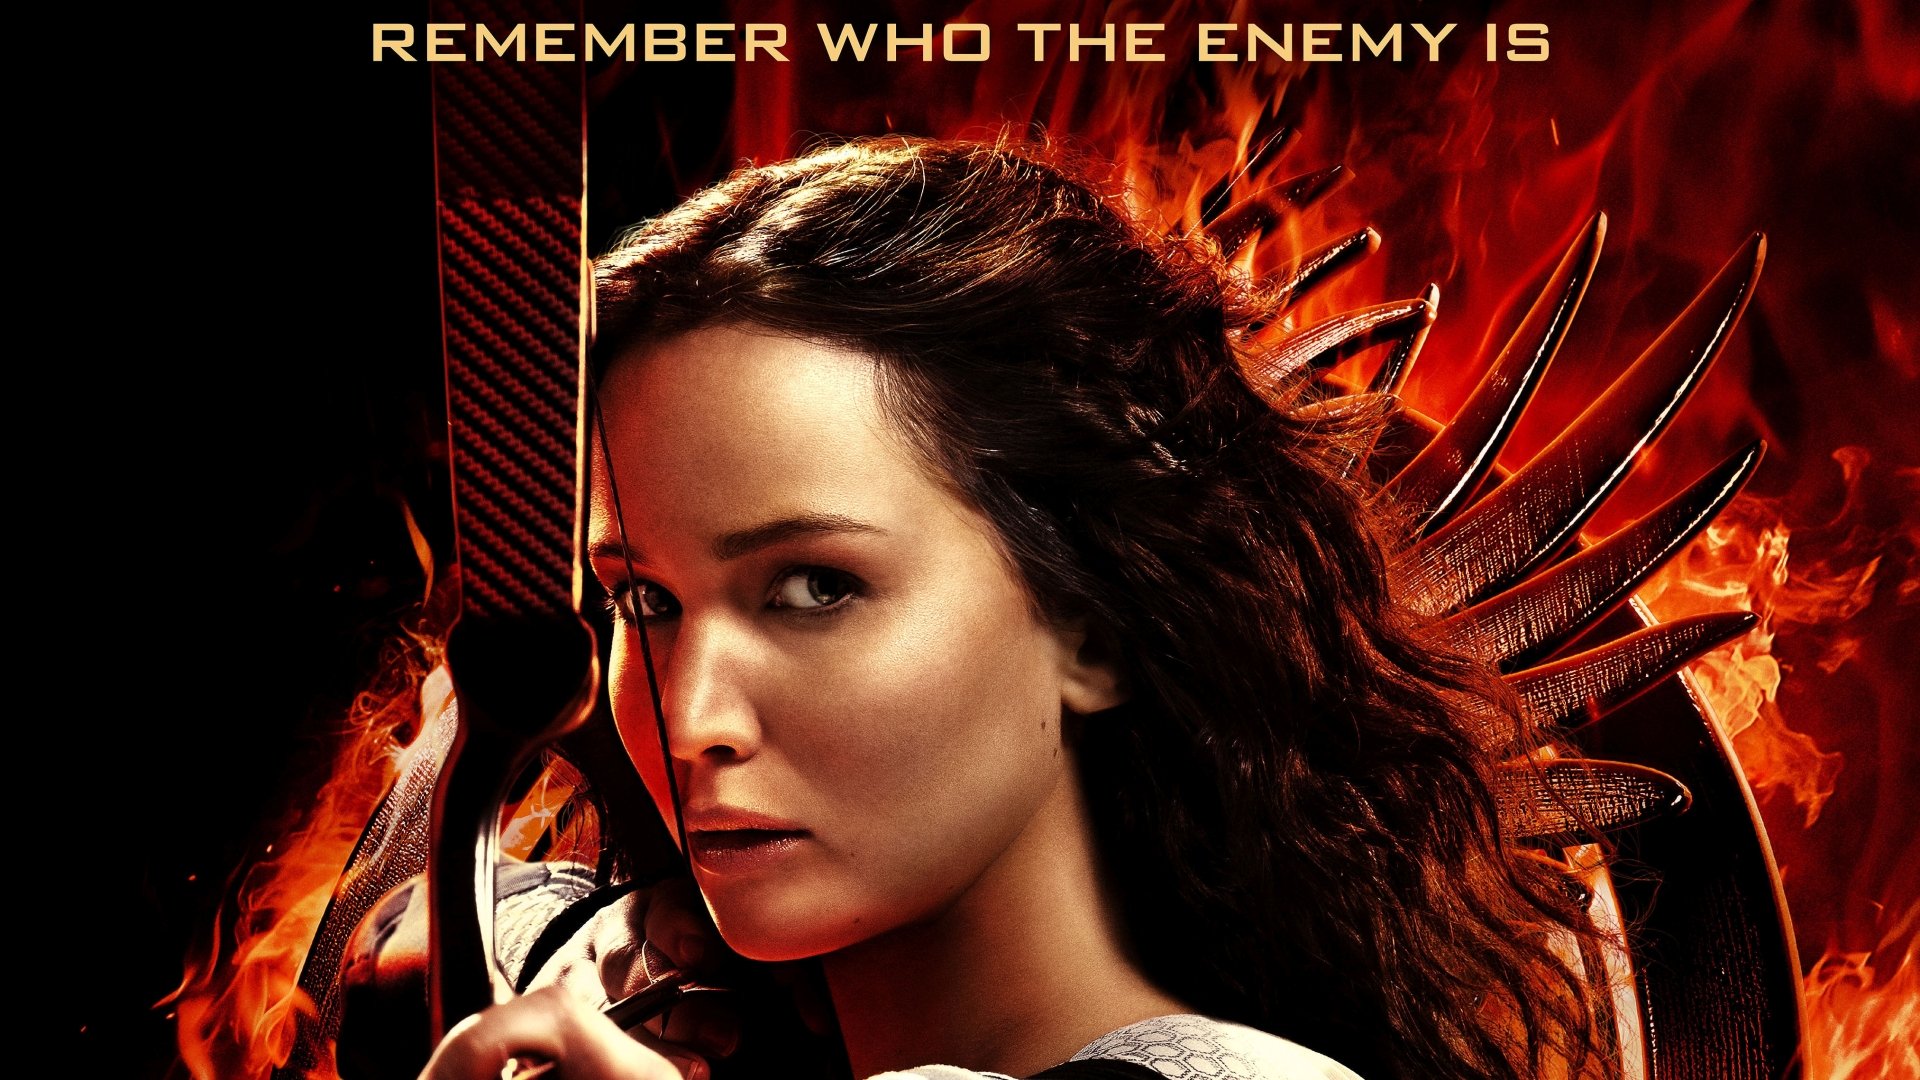 The Hunger Games: Catching Fire download the new version for windows